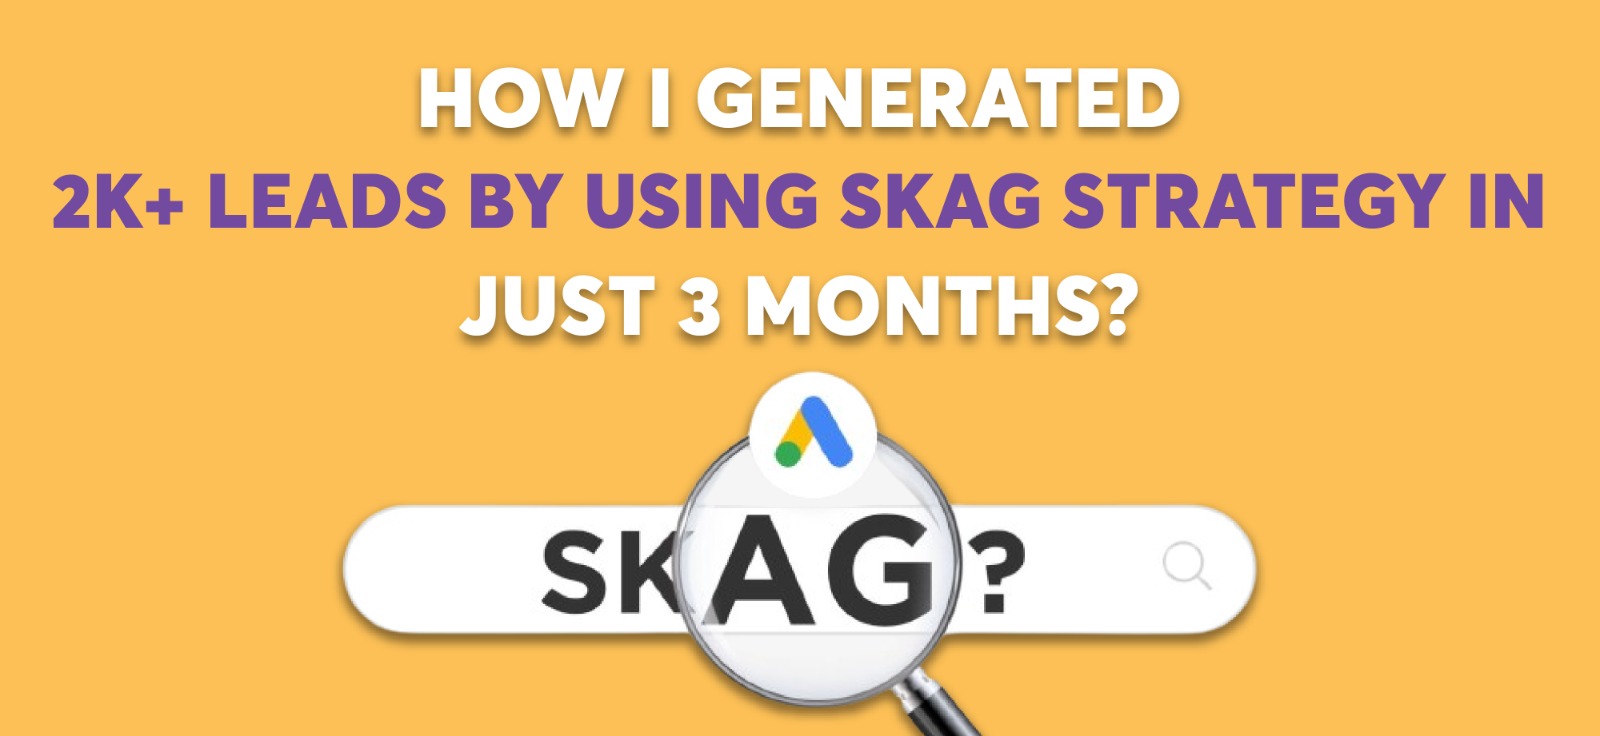 How I Generated 2K+ Leads by Using SKAG Strategy in Just 3 Months?